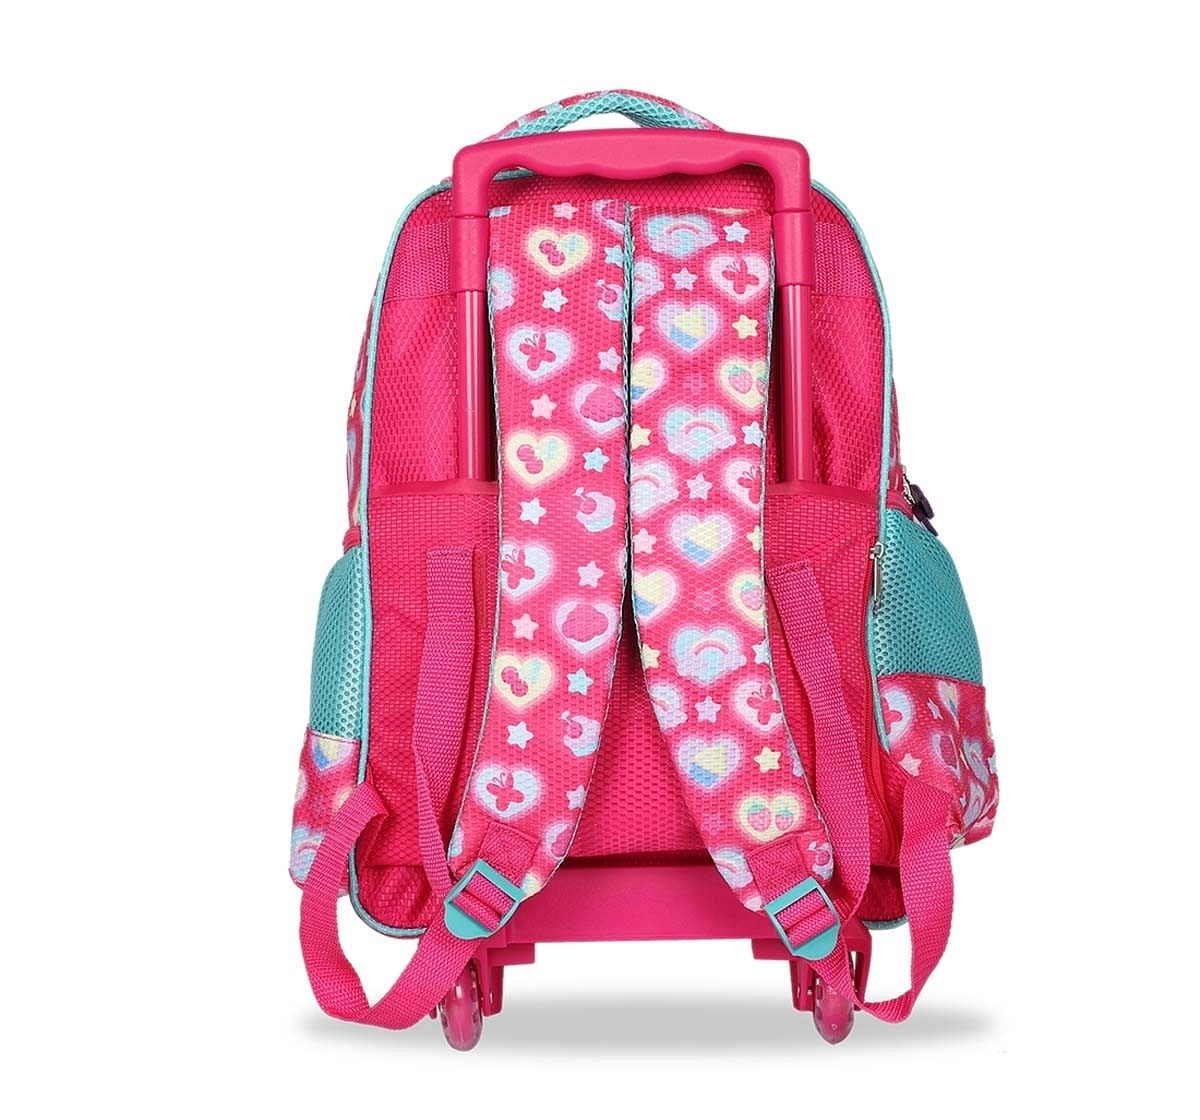 Skyrun Medium 30 L Backpack Stylish girls boys School Trolley Bags RED  (RED) 30 L Trolley Laptop Backpack RED - Price in India | Flipkart.com